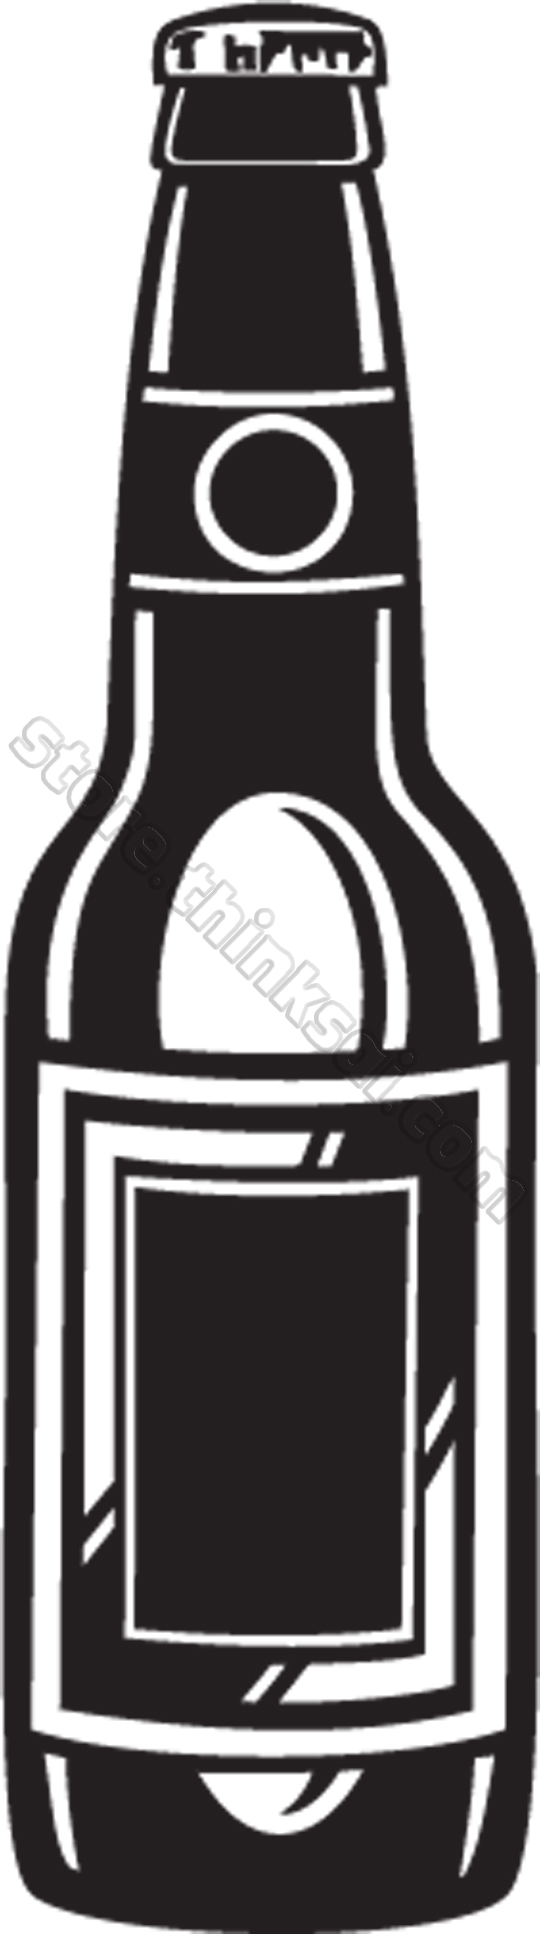 free clipart beer labels - photo #48